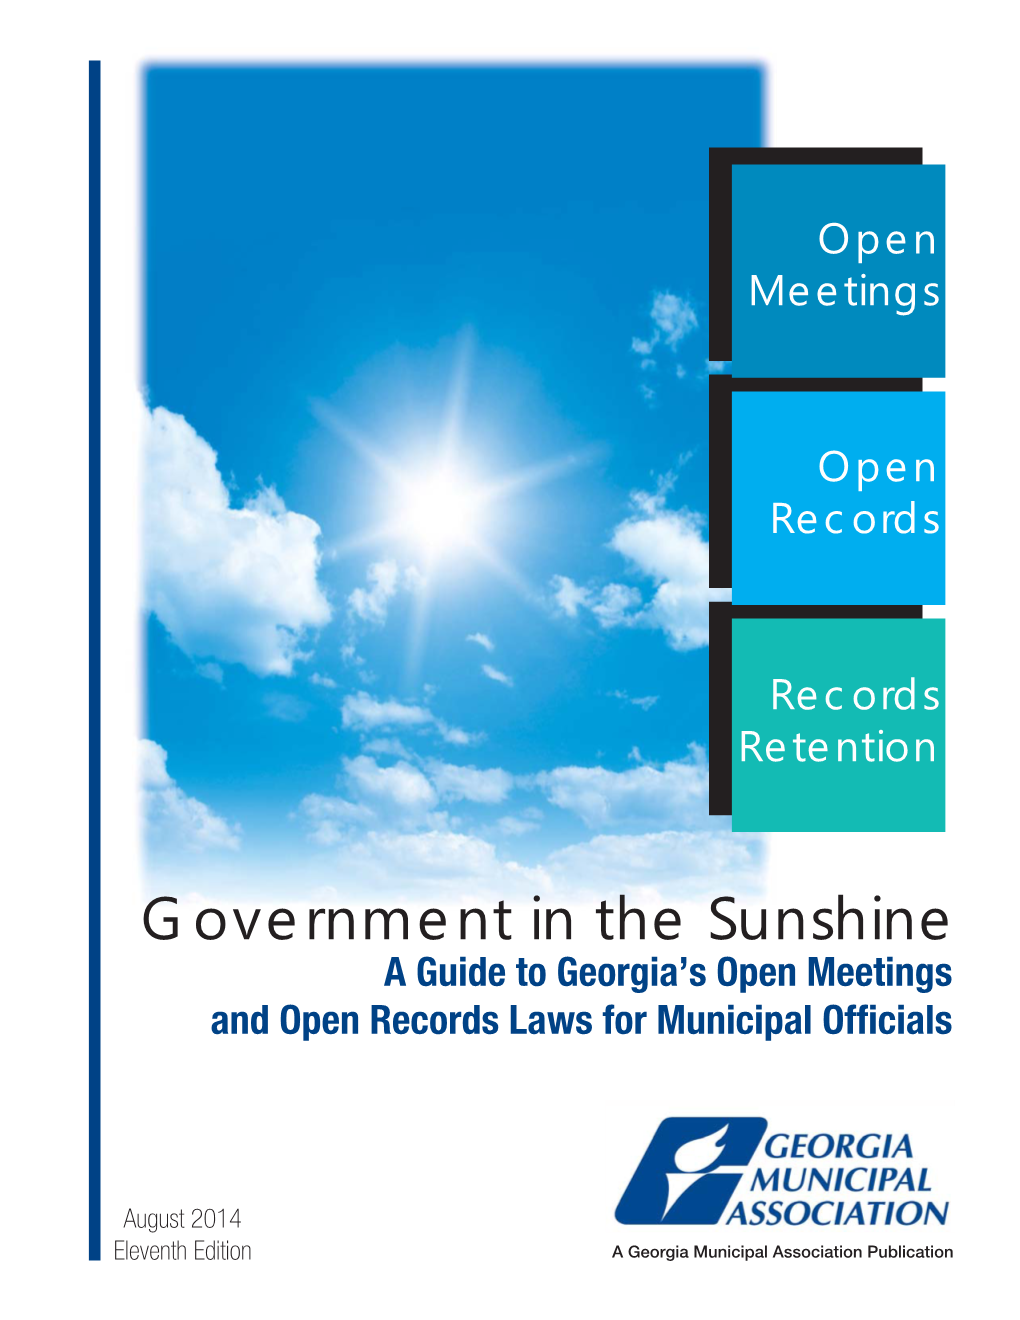 Government in the Sunshine a Guide to Georgia’S Open Meetings and Open Records Laws for Municipal Ofﬁcials